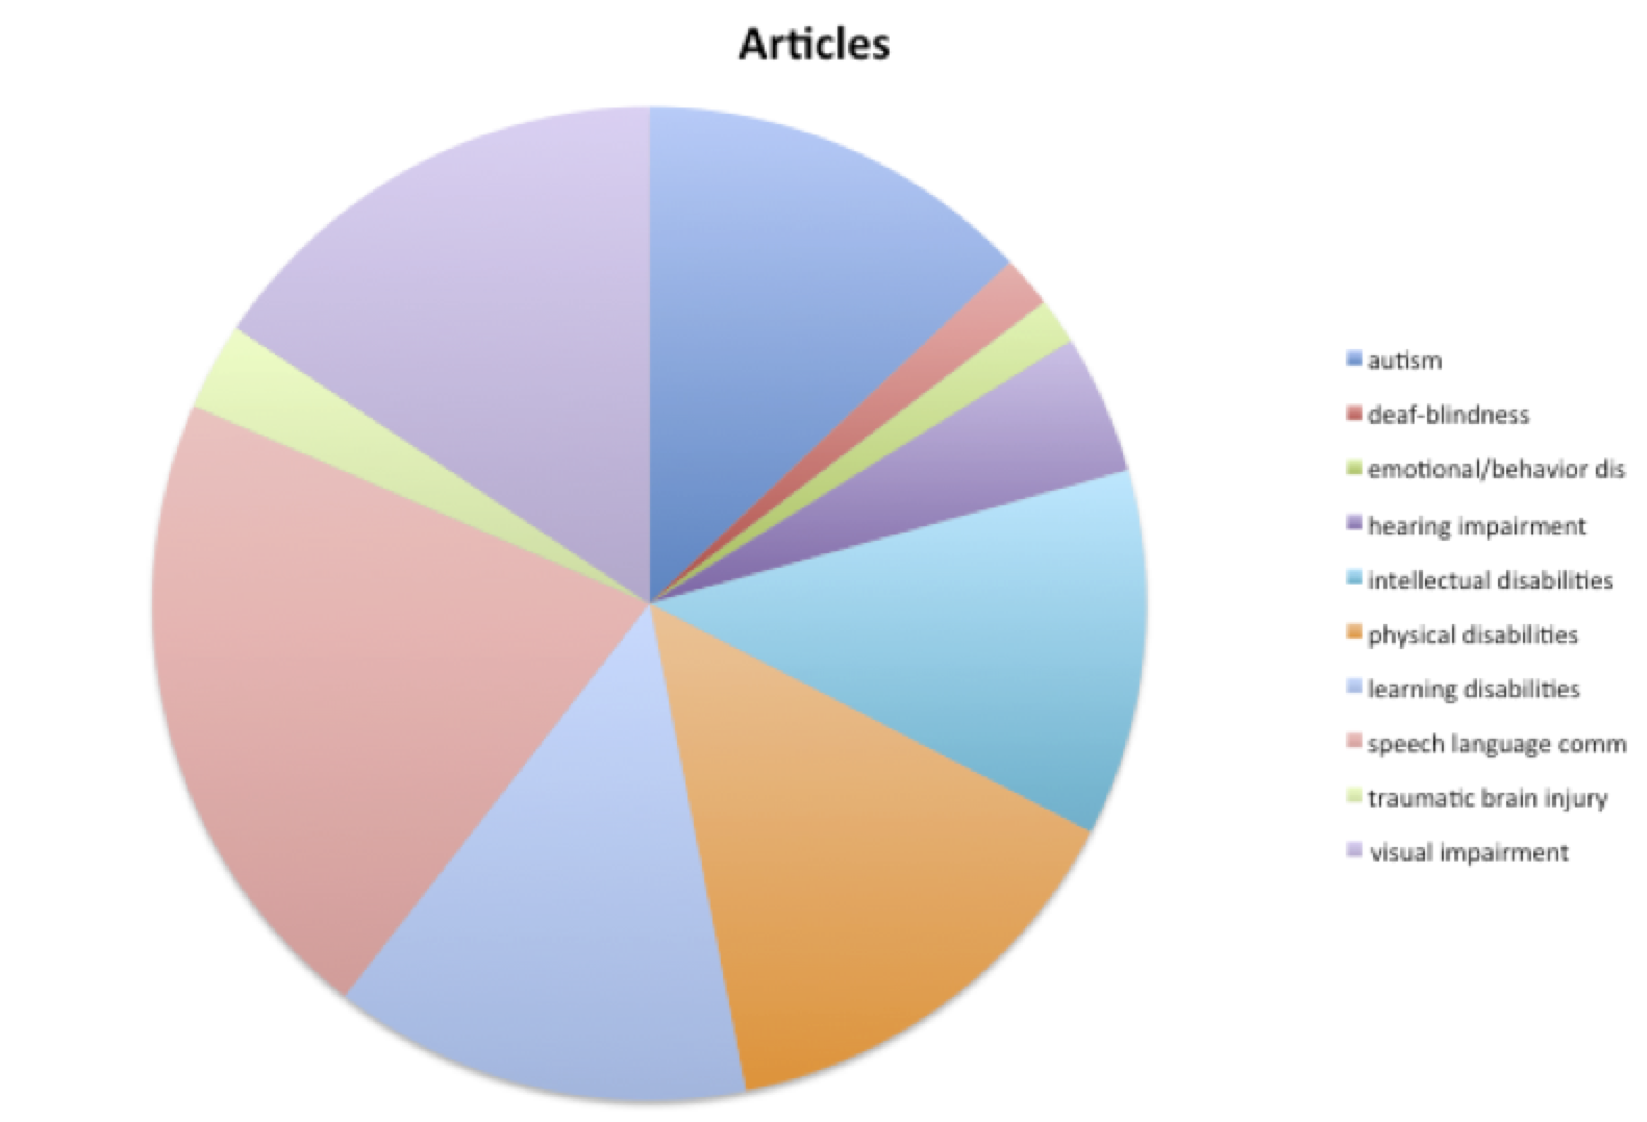 A pie chart illustrating the number of articles found by disability.